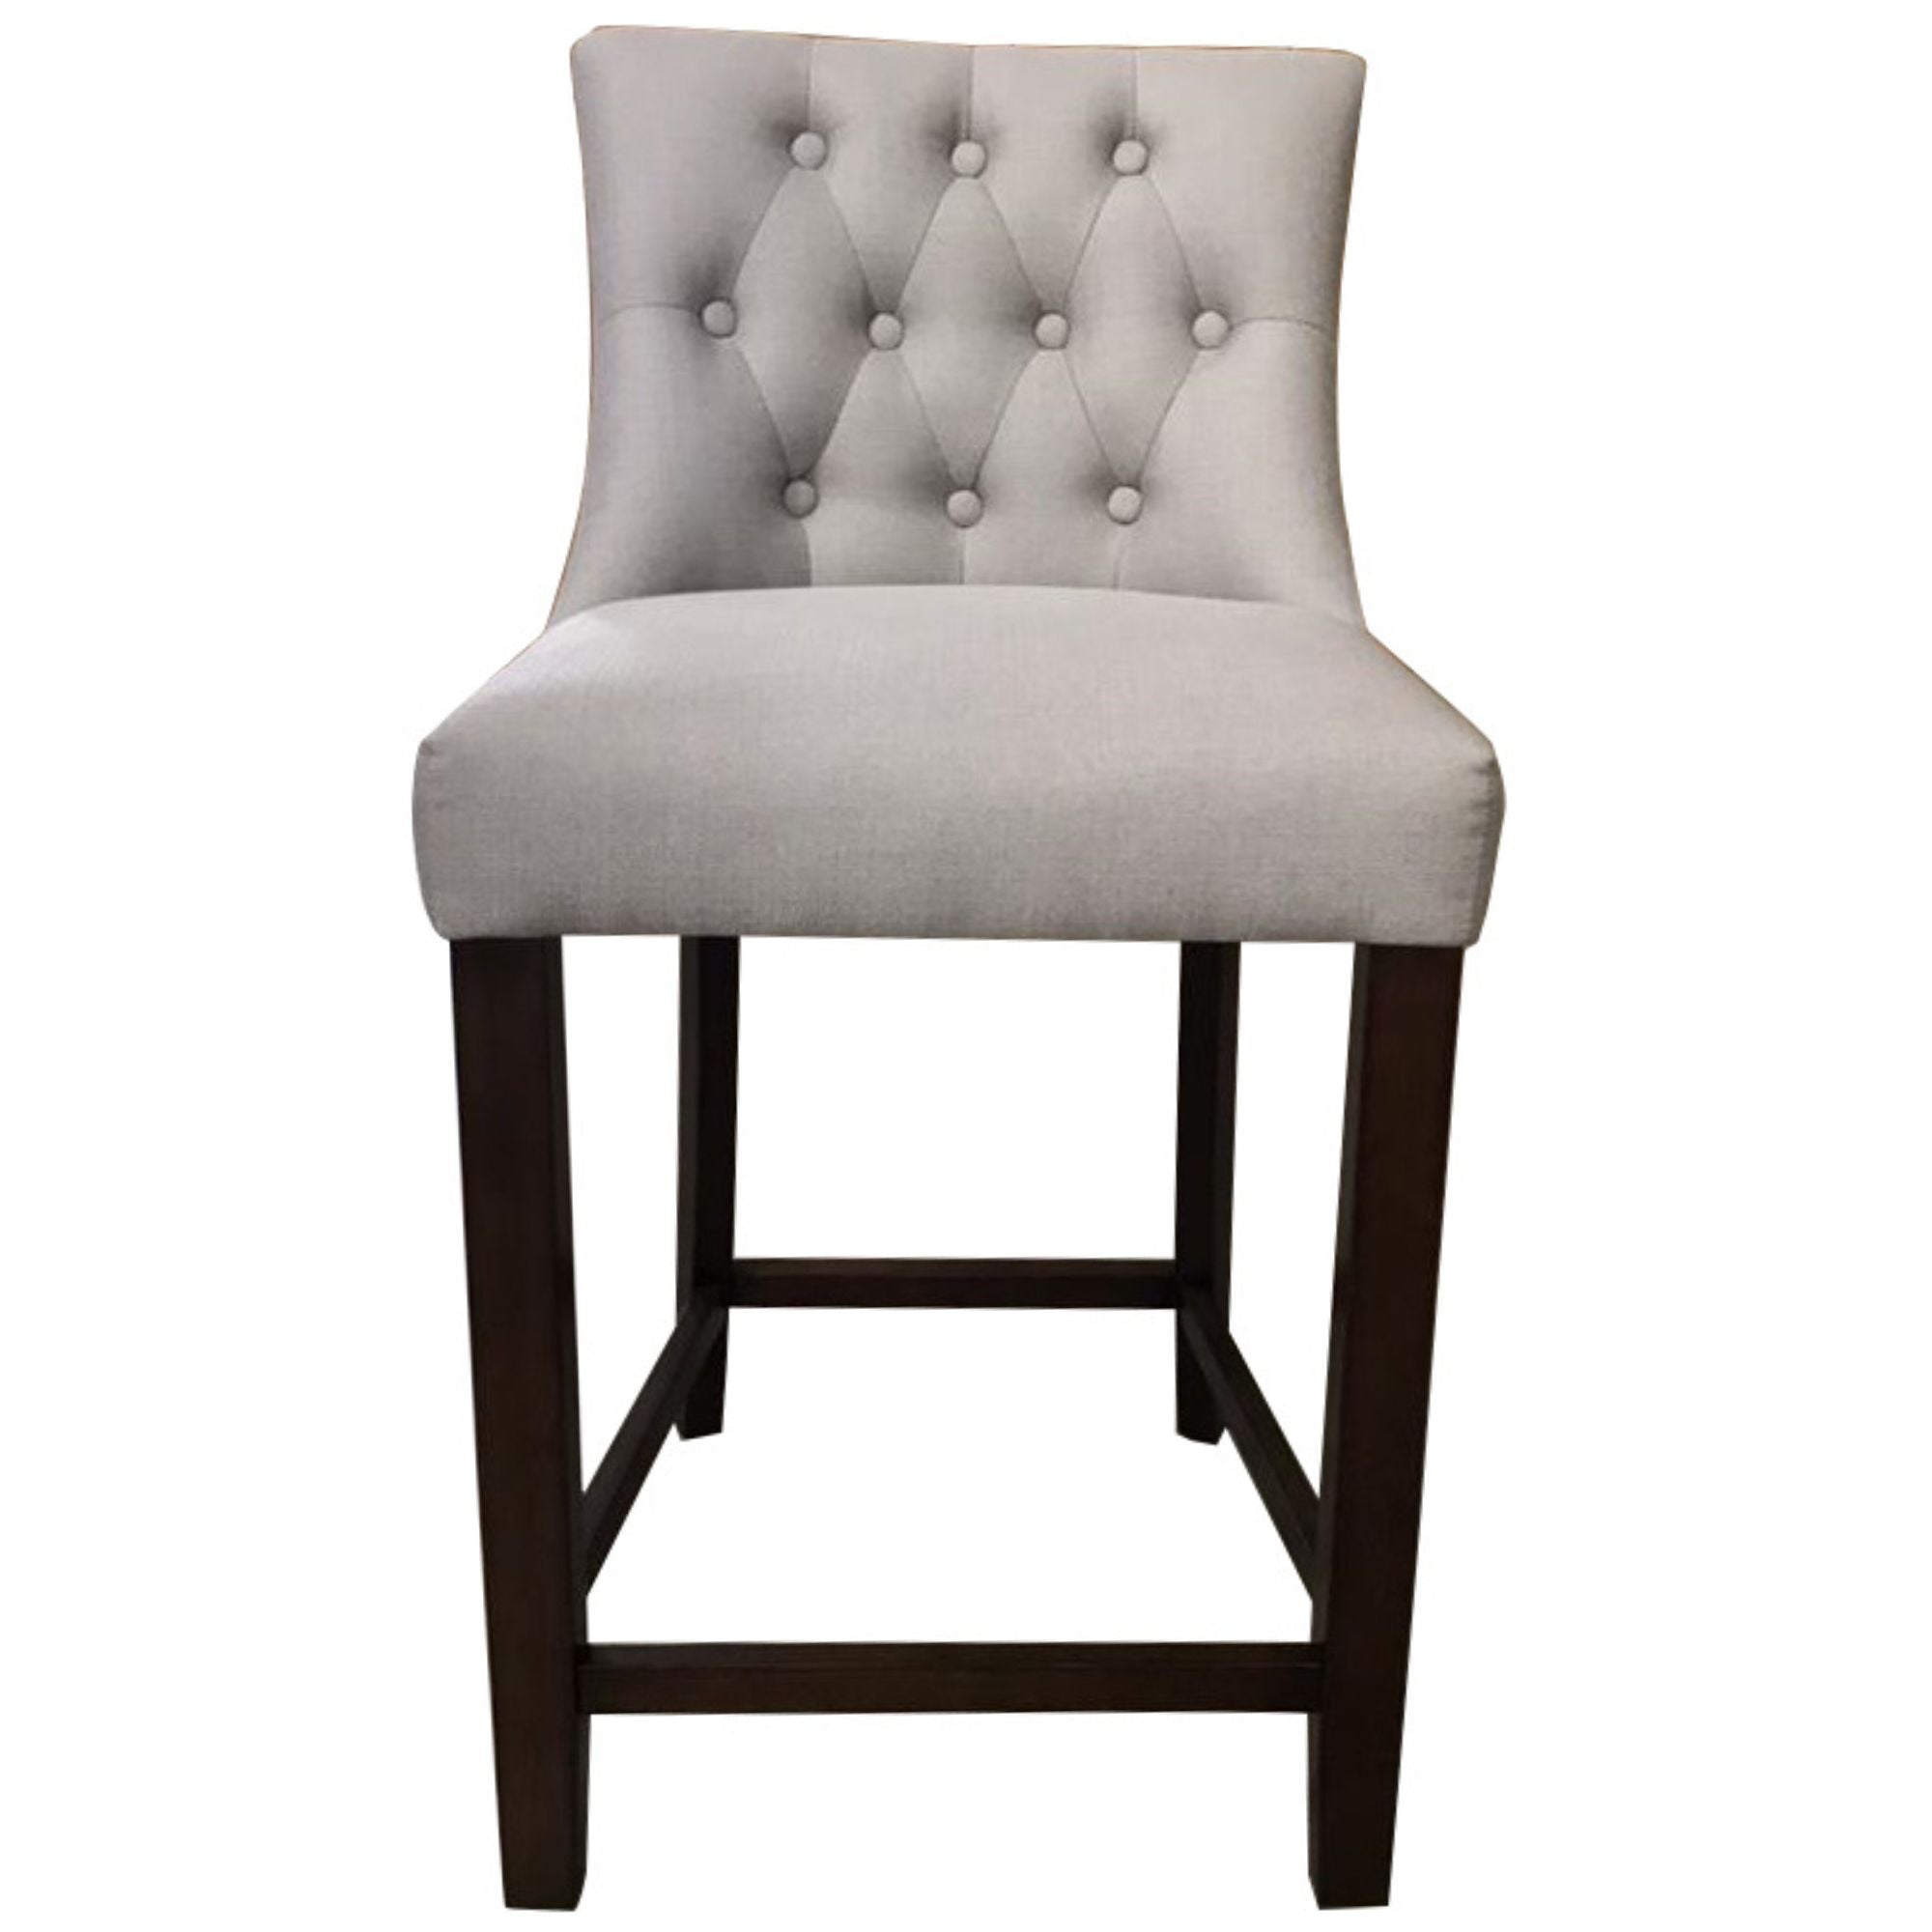 Luxurious French Provincial Solid Timber Dining Chair Bar Stool with High-Quality